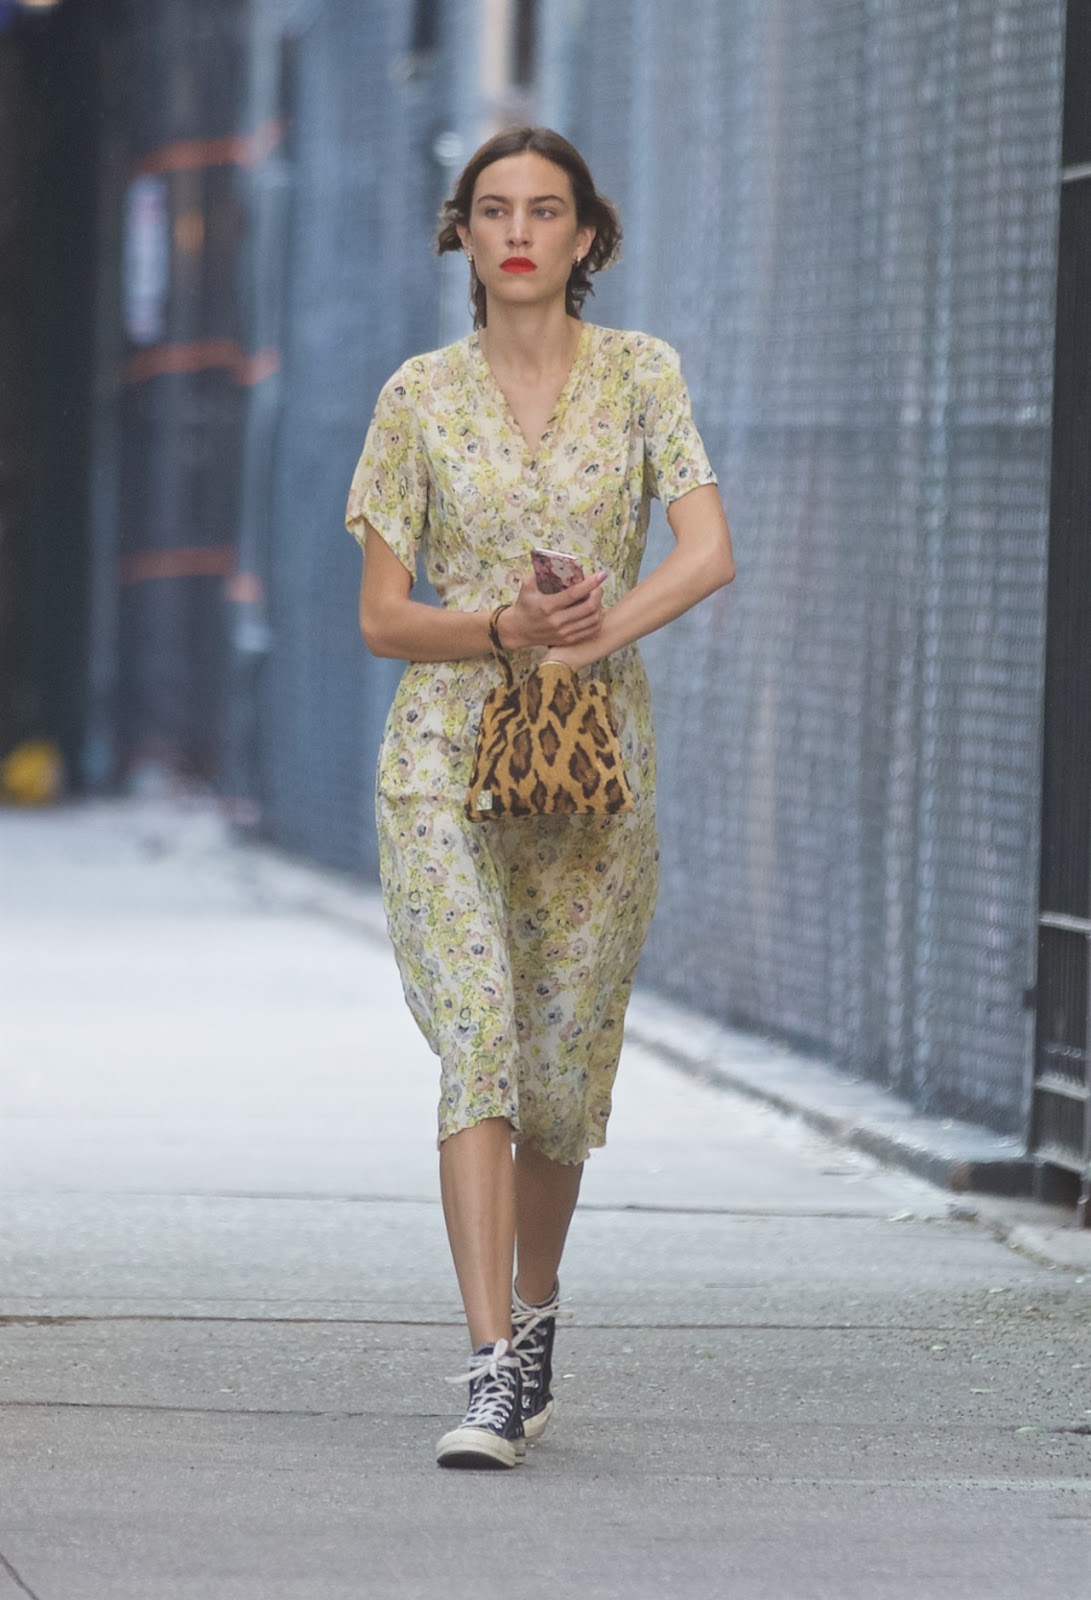 Alexa Chung Wears Vintage Florals Out in NYC